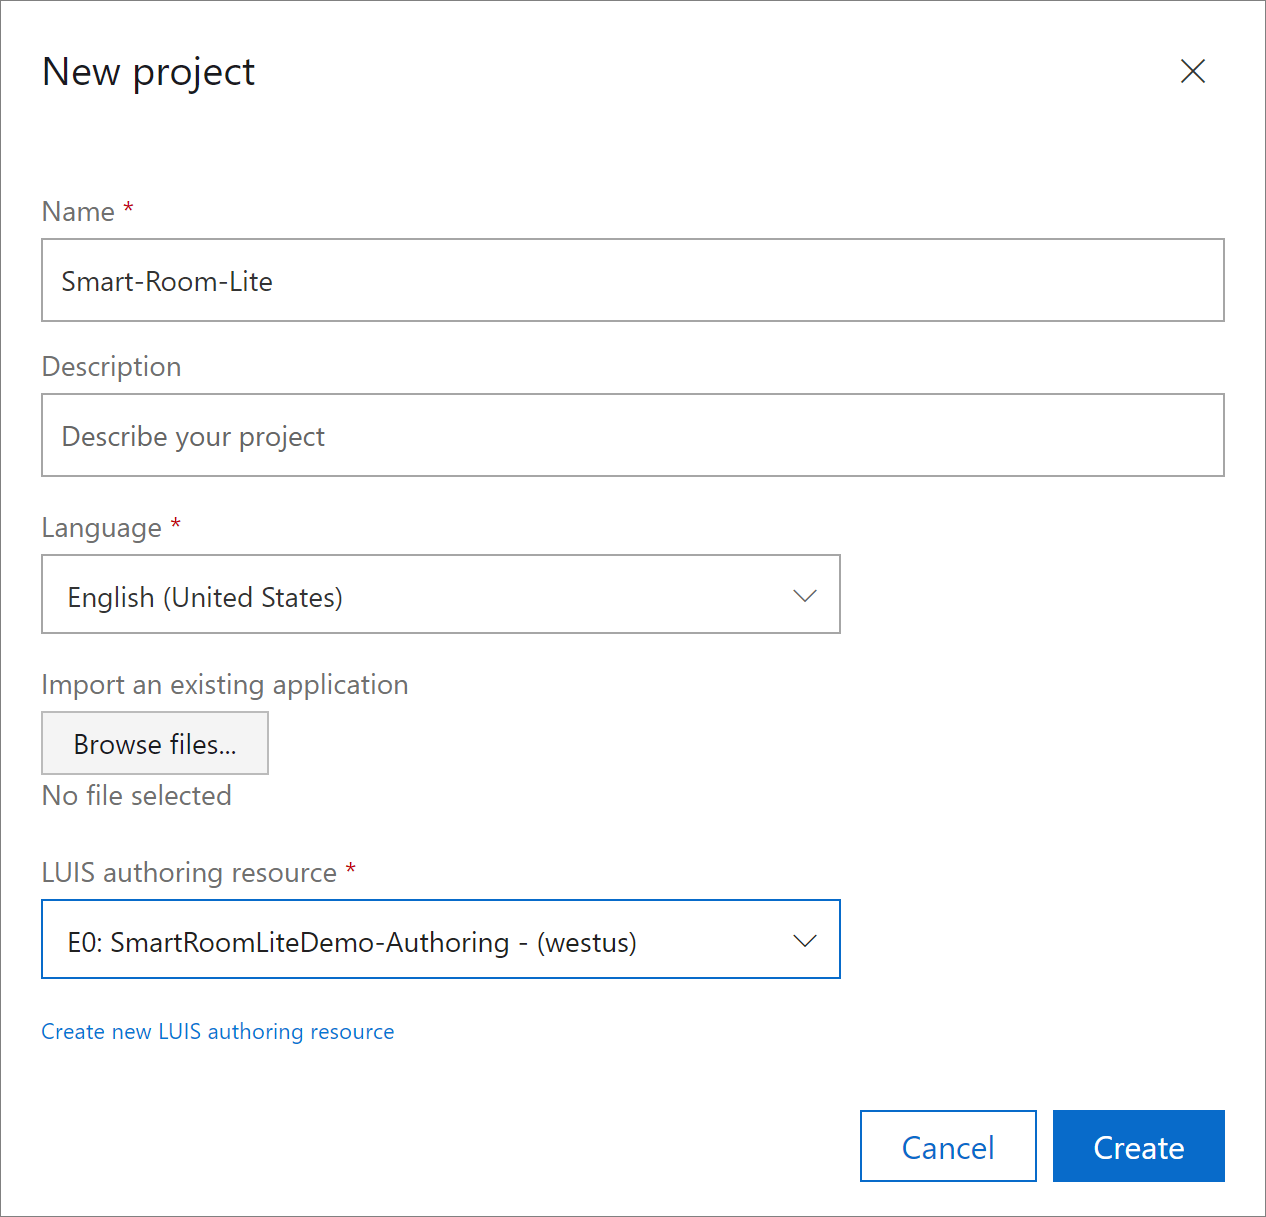 Screenshot showing the "New project" window.